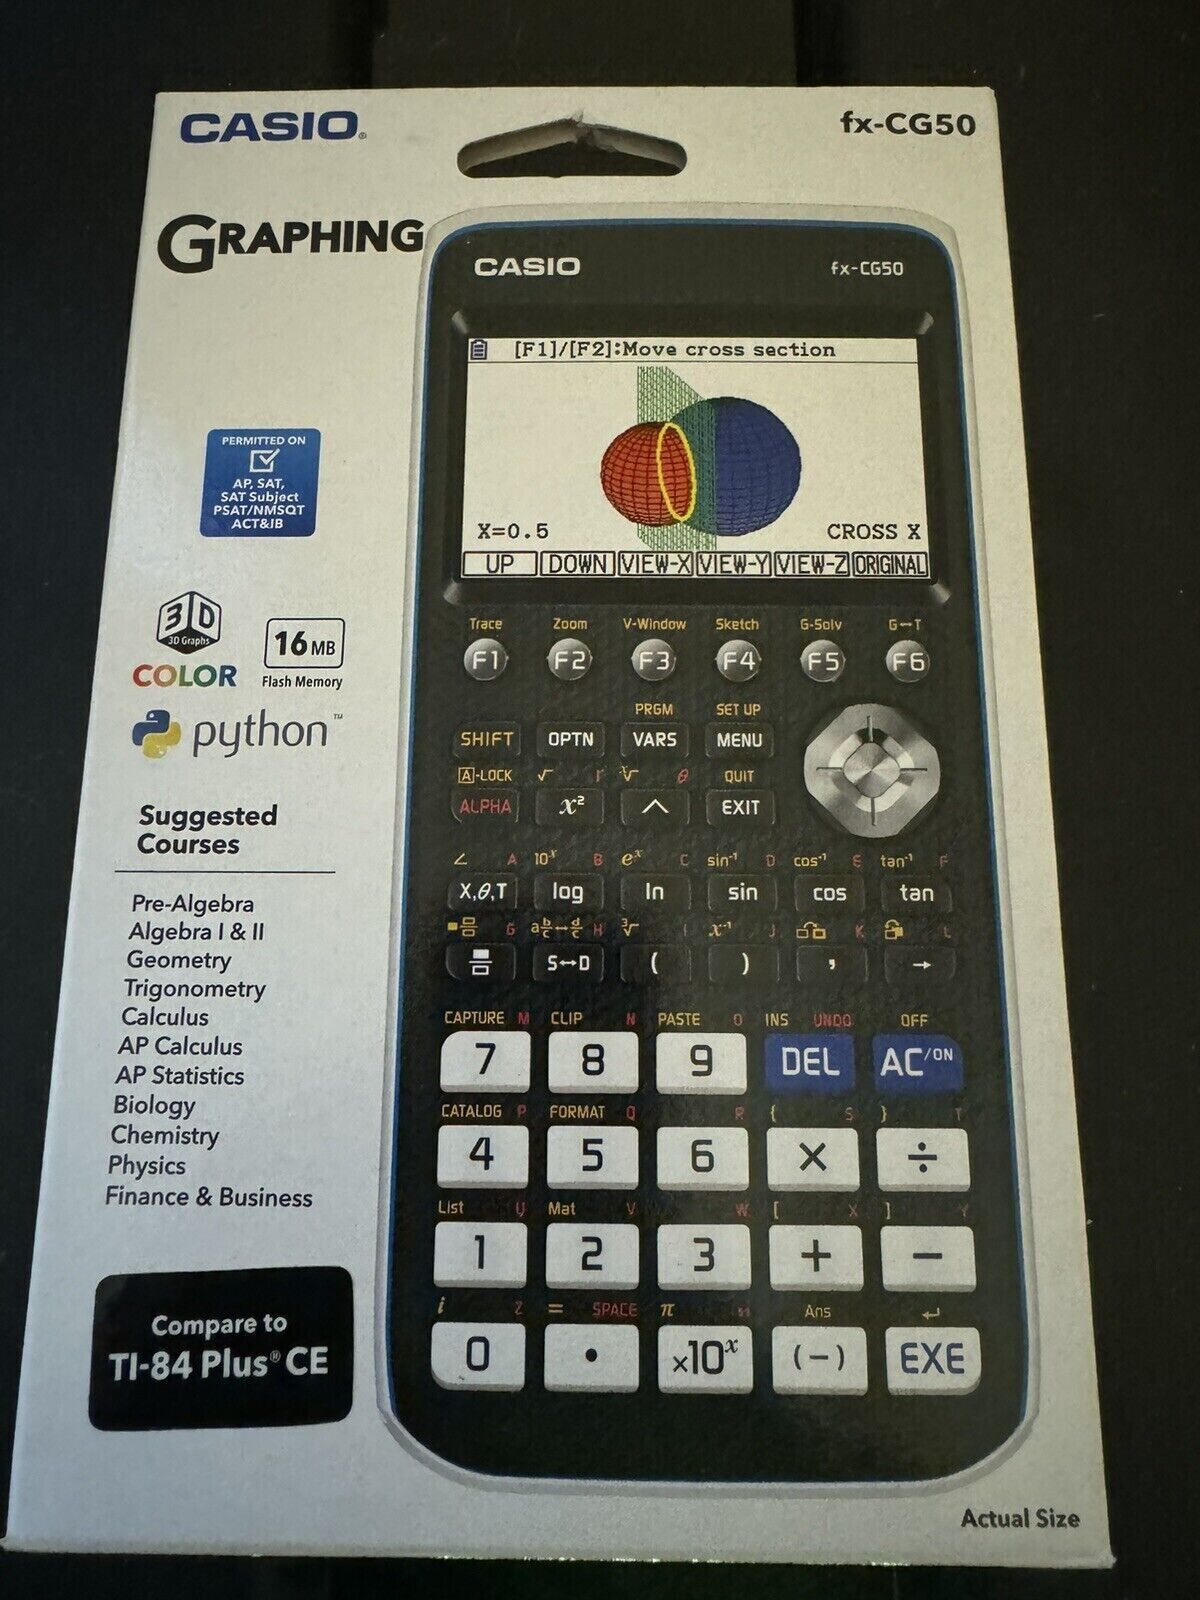 CASIO FX-CG50 Graphing Calculator, 3D Color, Python, 16MB Flash Memory, BrandNew